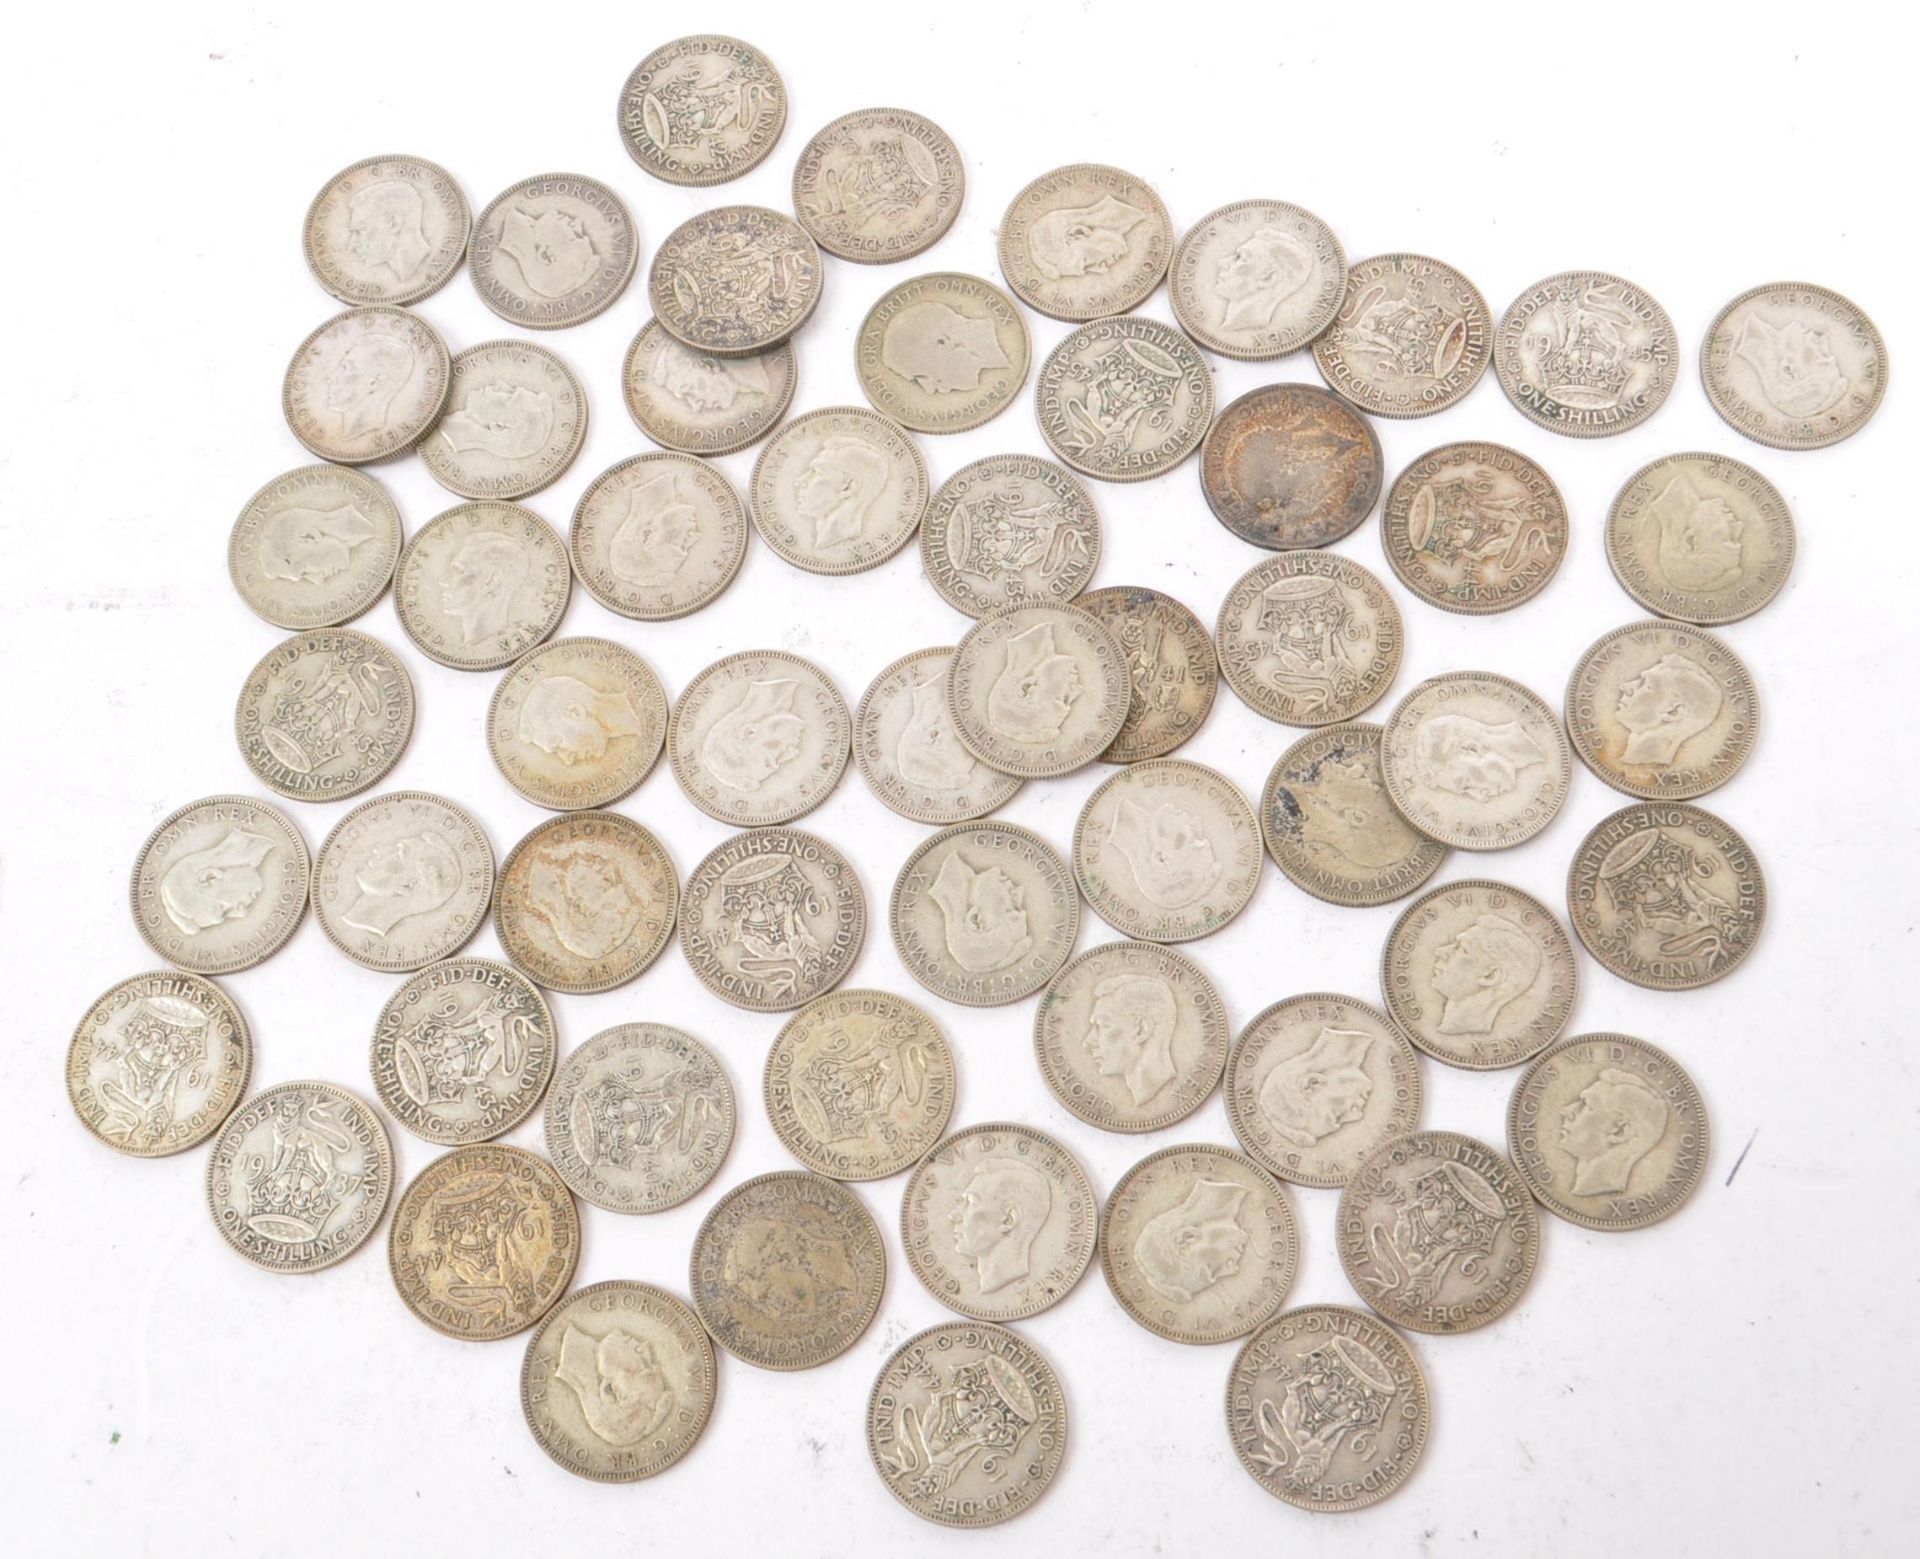 COLLECTION OF 20TH CENTURY SHILLING COINS - 322G